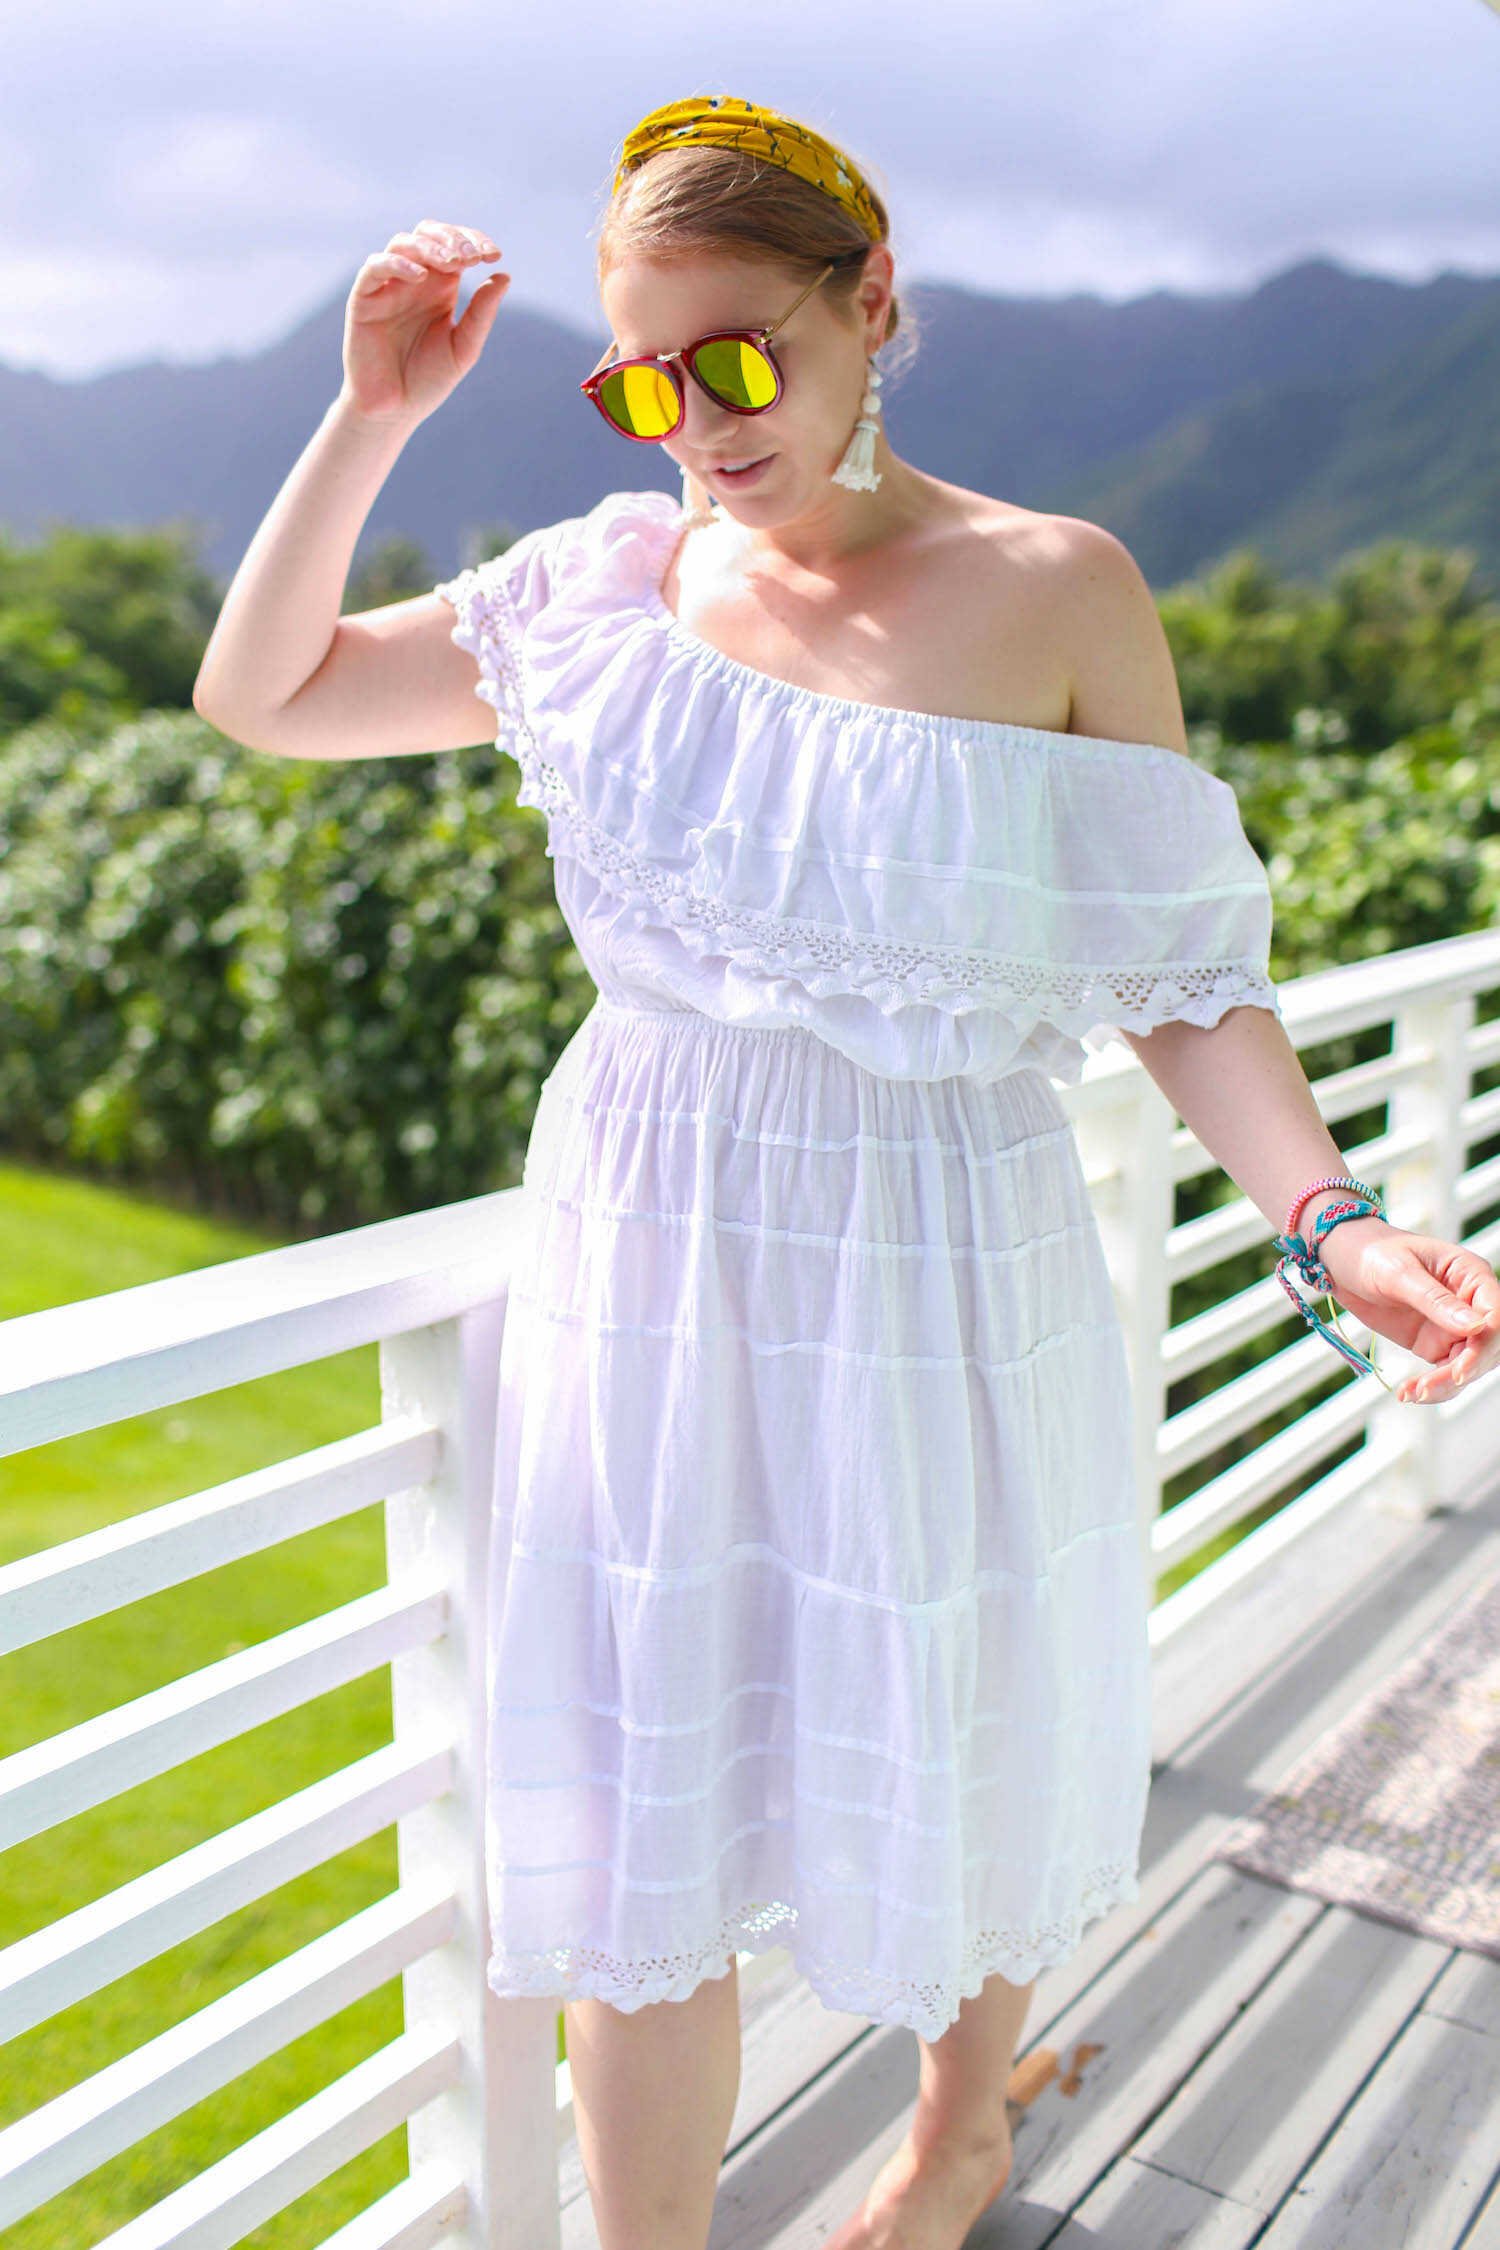 Top 10 Epic 30th Birthday Travel Destinations - Me in my favorite white beach dress in Oahu.